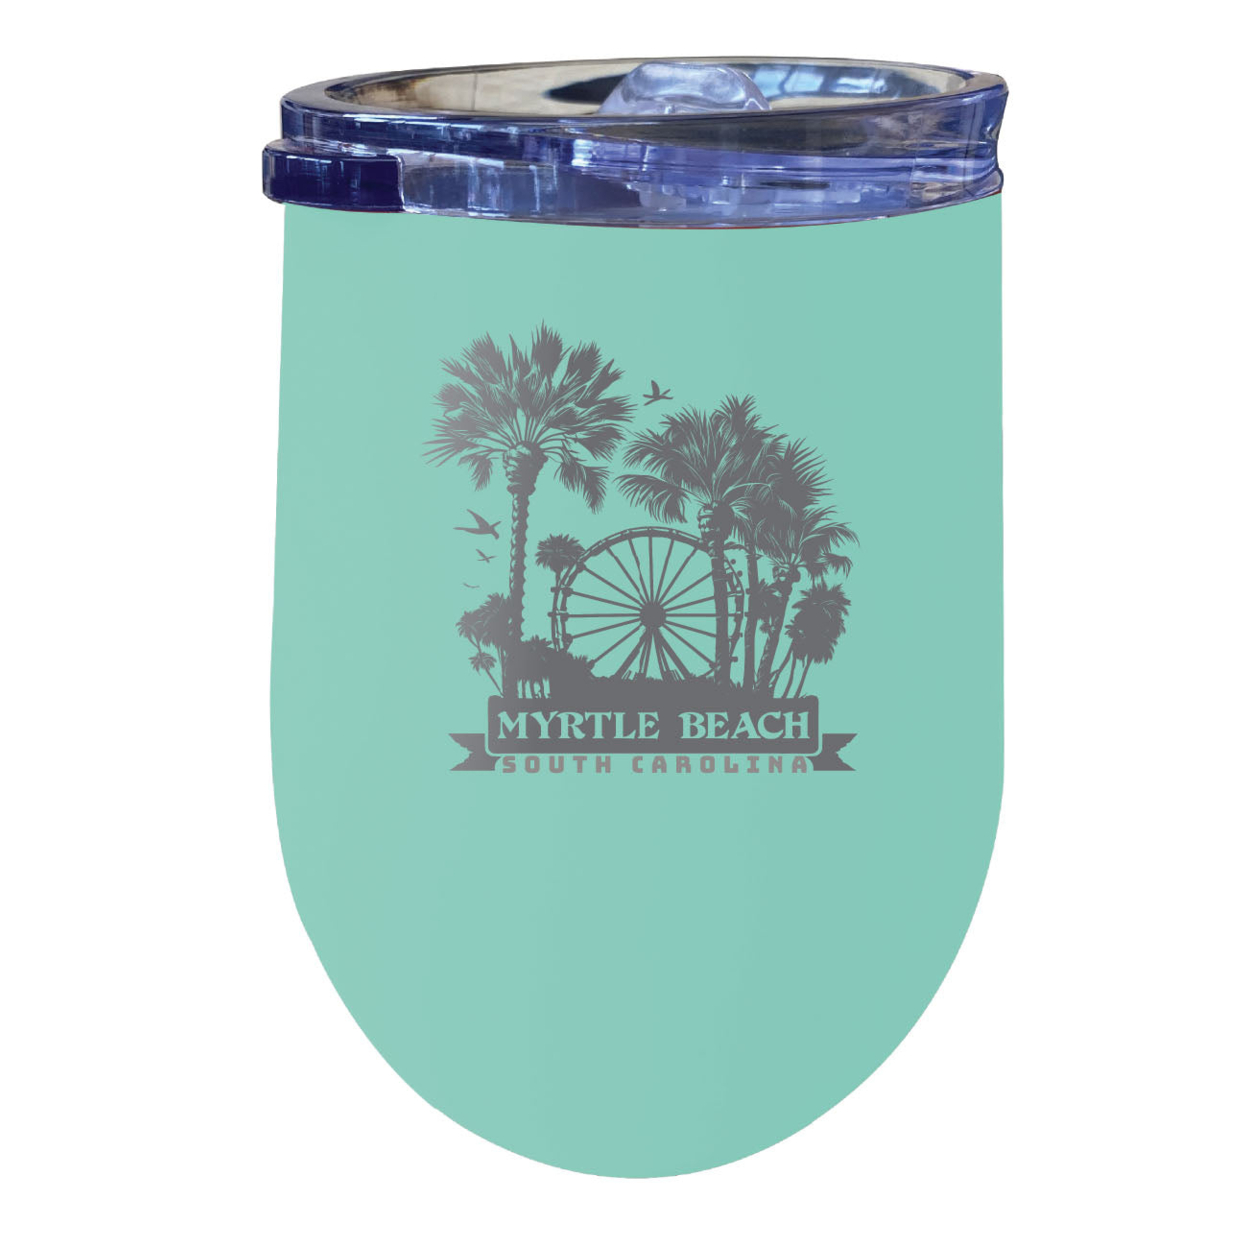 Myrtle Beach South Carolina Laser Etched Souvenir 12 Oz Insulated Wine Stainless Steel Tumbler - Seafoam